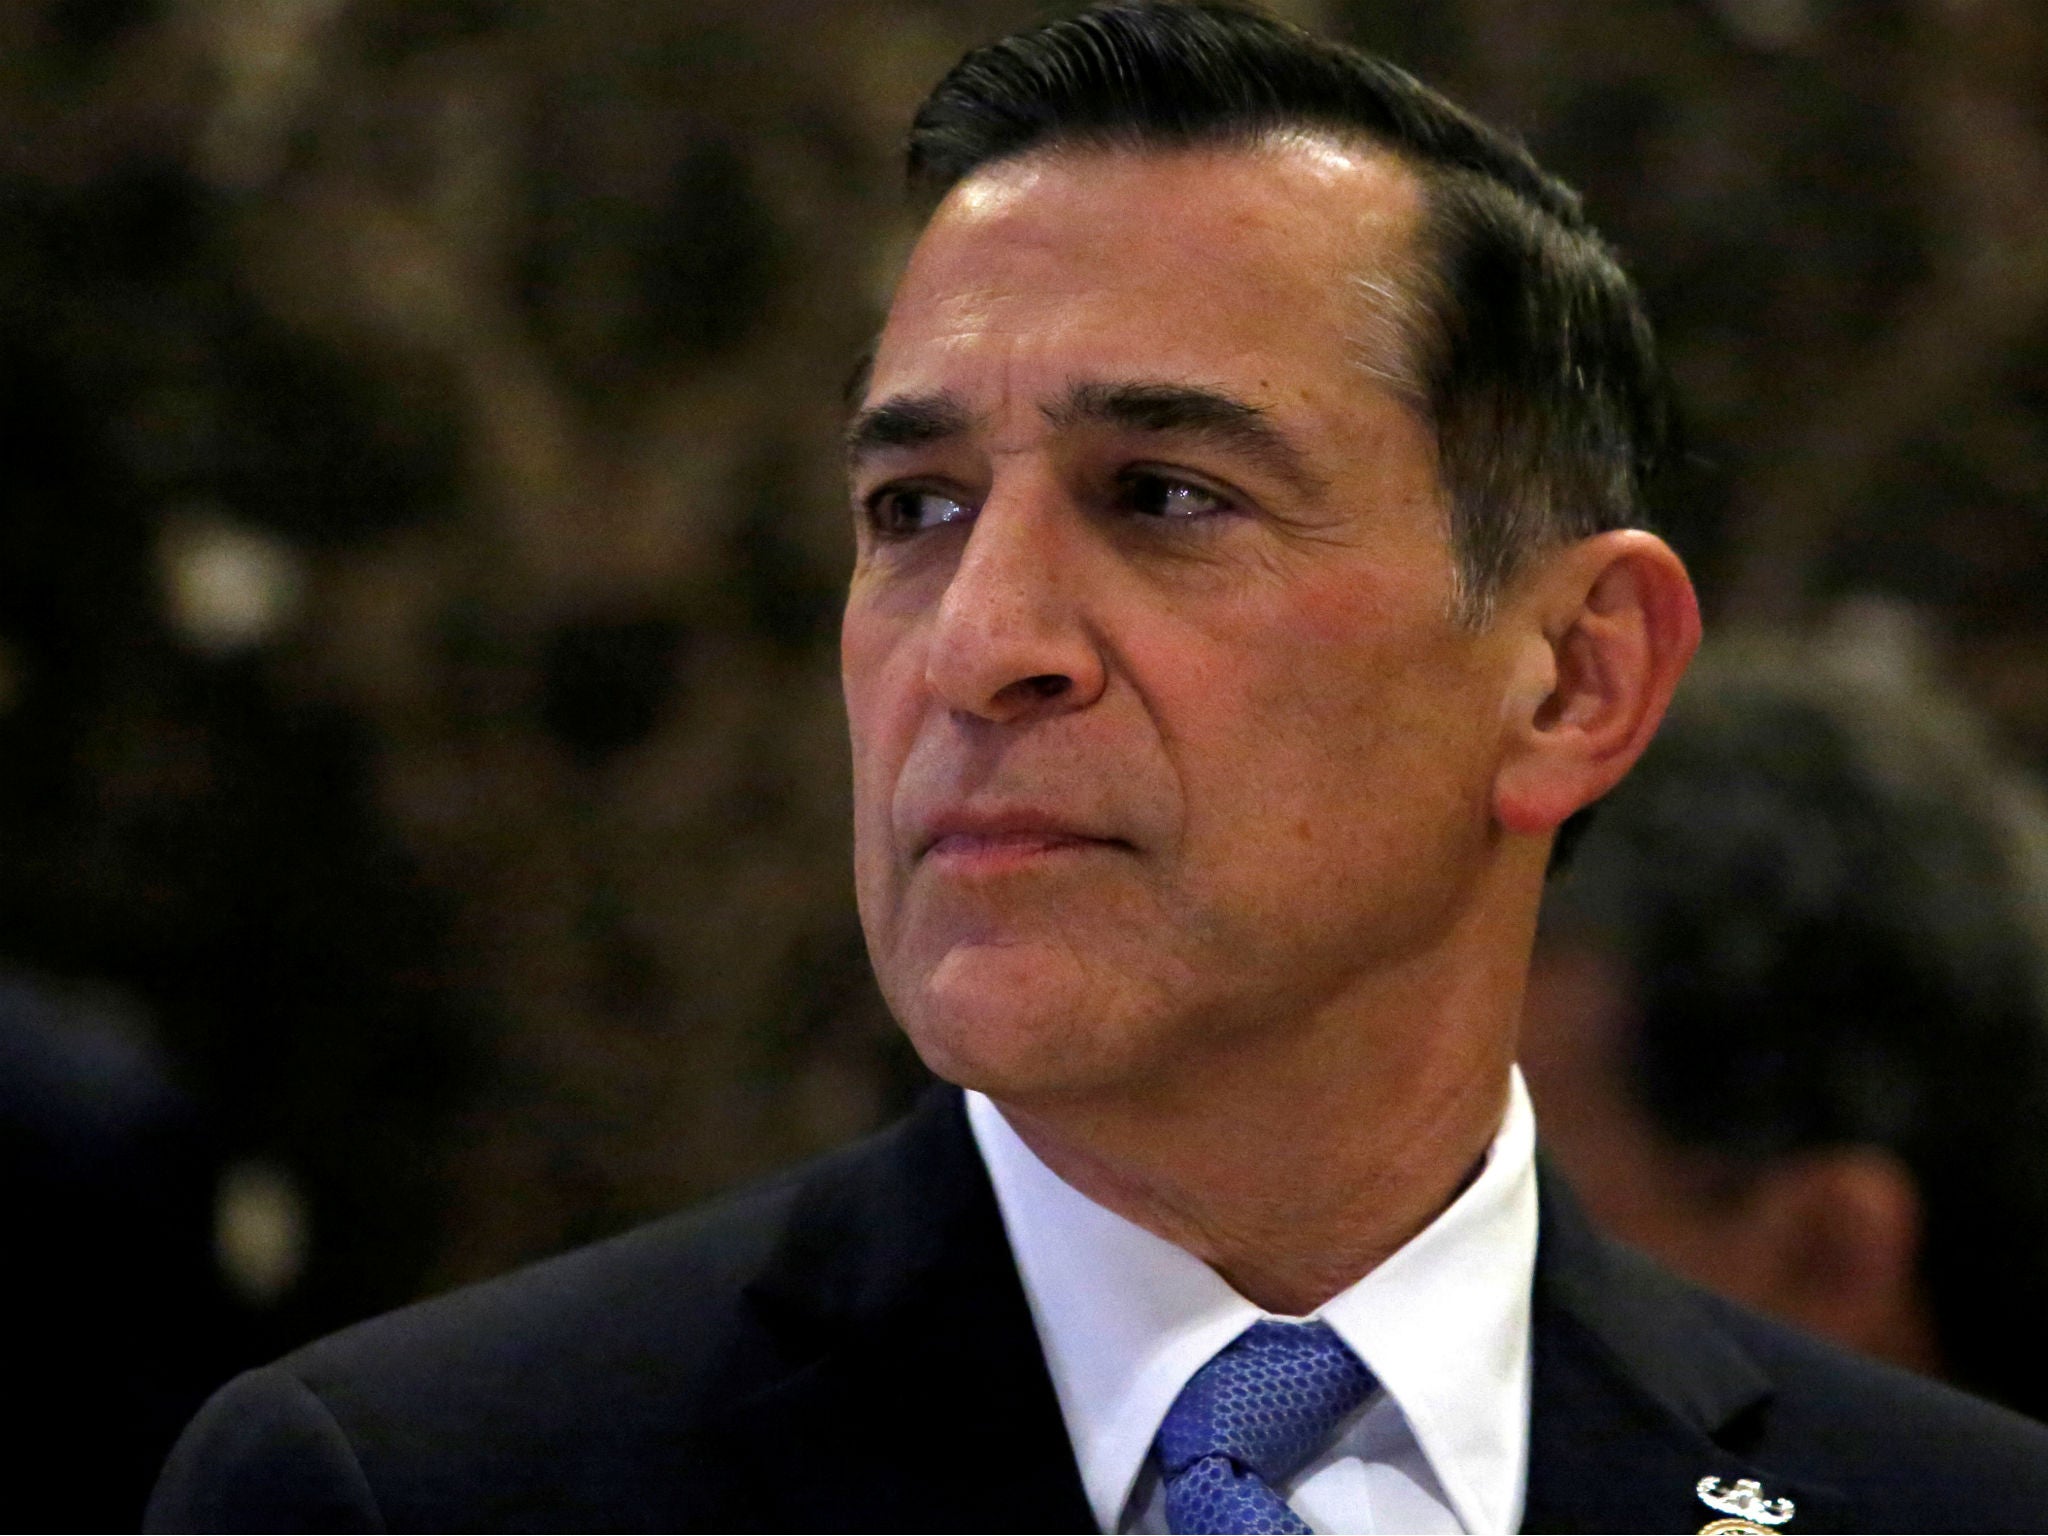 Darrell Issa's exit could help Democrats win a majority in the House of Representatives